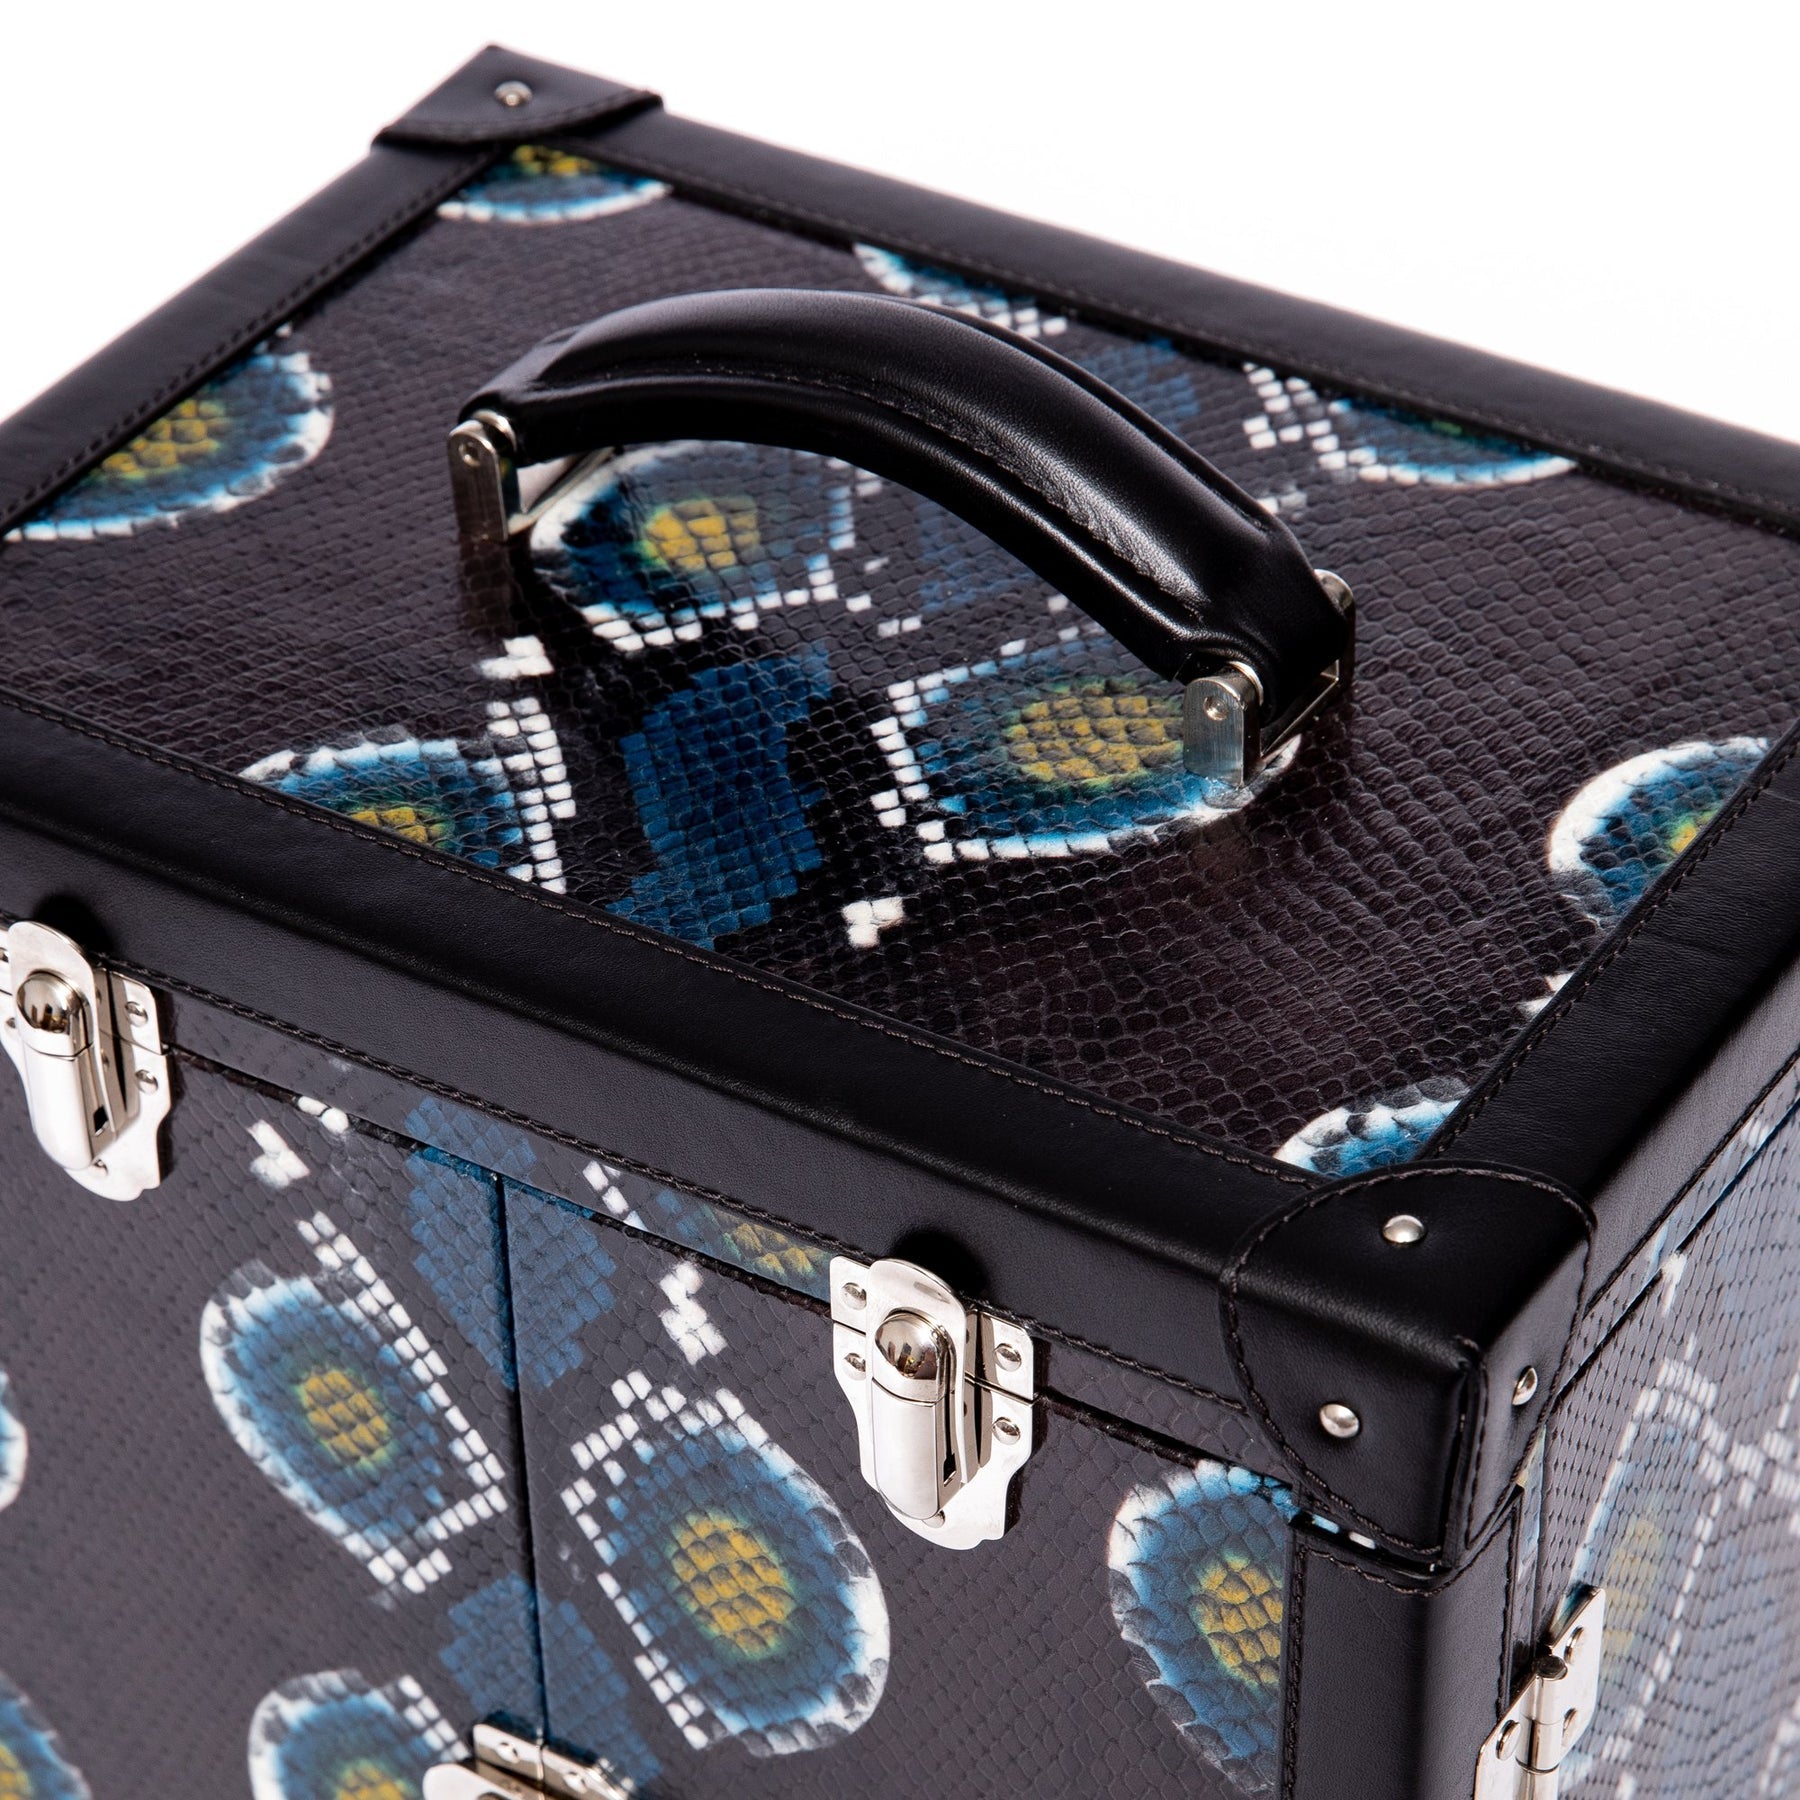 Rapport - Amour Deluxe Jewelry Trunk in Blue Leather | J155